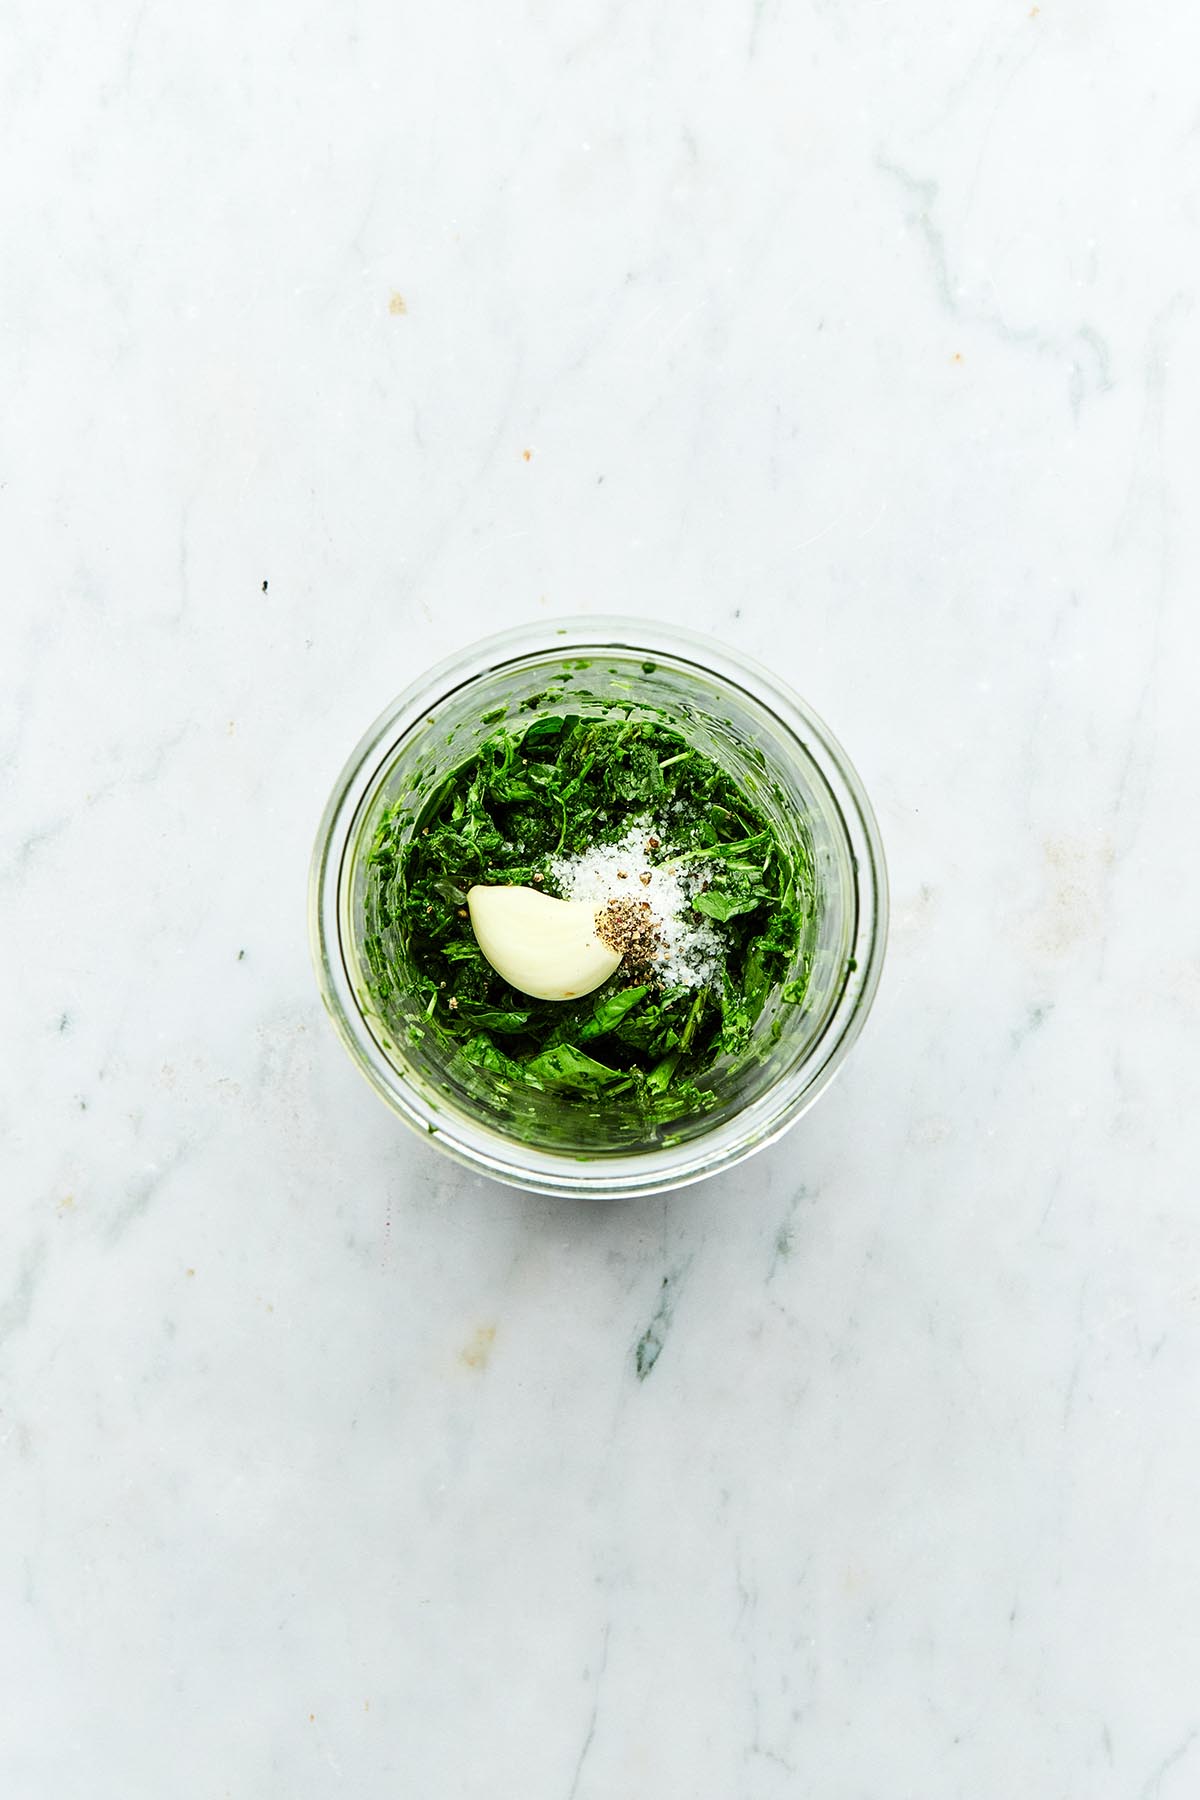 Puréed basil and spinach in a jar topped with a garlic clove, flaky salt, and cracked pepper.